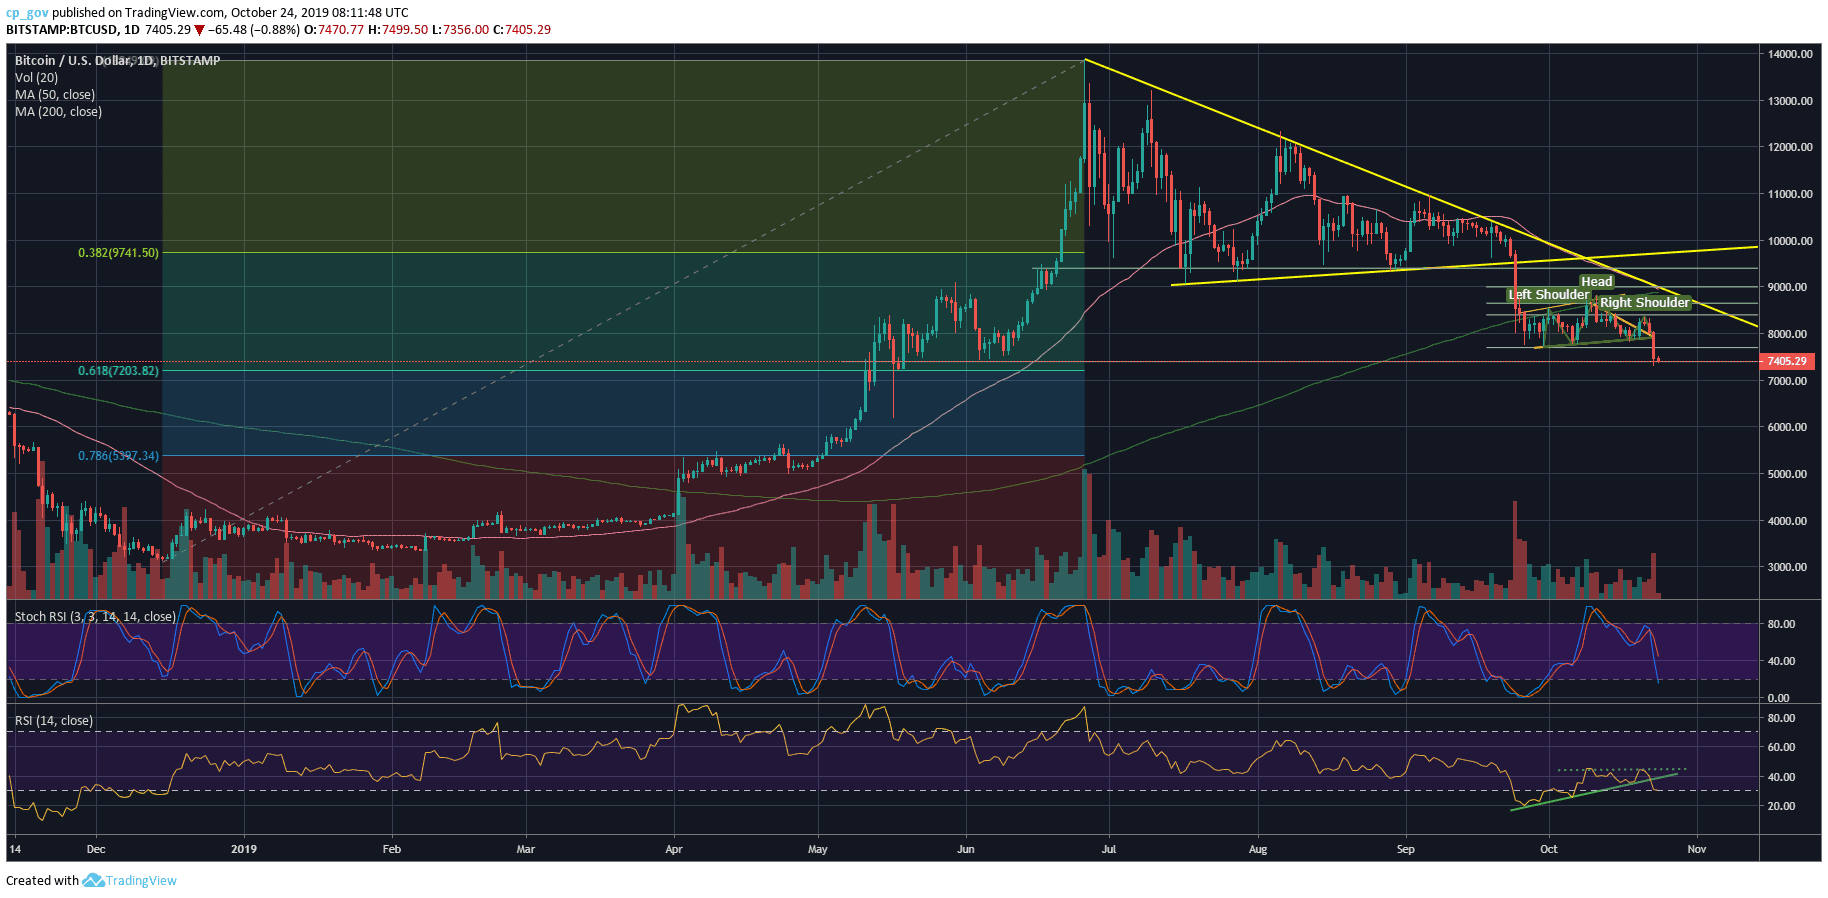 Crypto Winter Is Here: Those Are The Next Possible Targets For Bitcoin Price (Analysis & Overview)